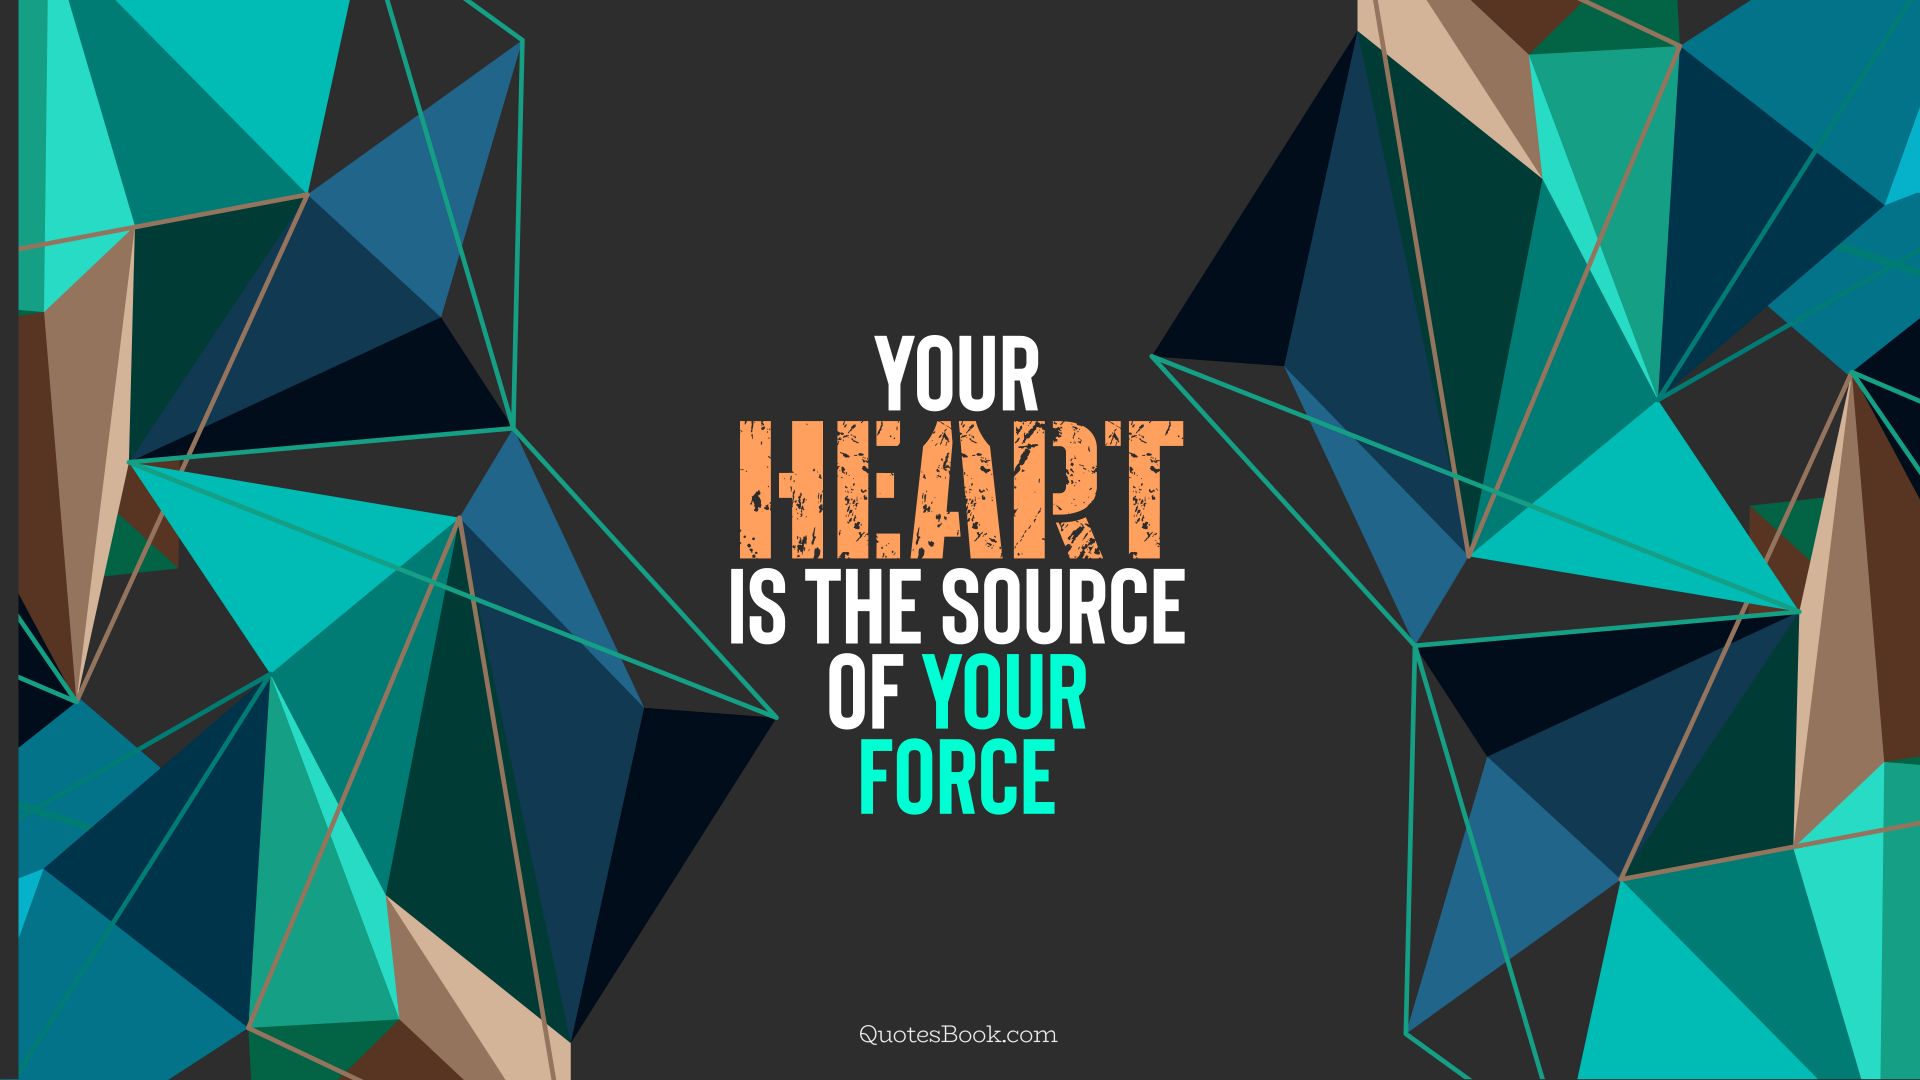 Your heart is the source of your force. - Quote by QuotesBook